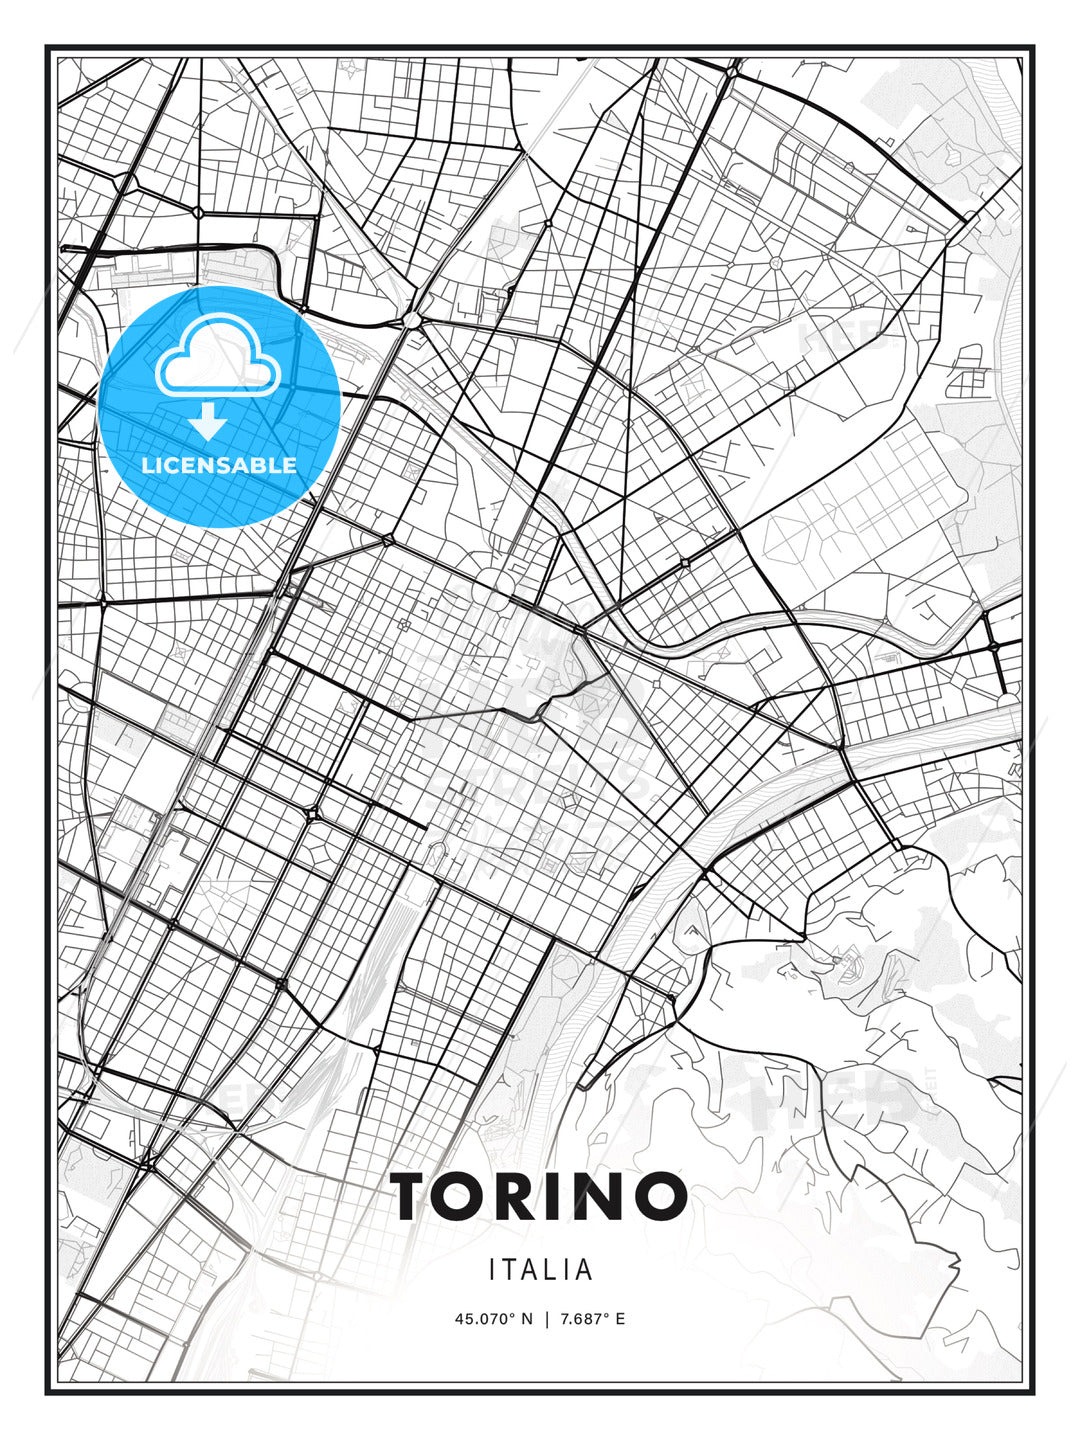 TORINO / Turin, Italy, Modern Print Template in Various Formats - HEBSTREITS Sketches